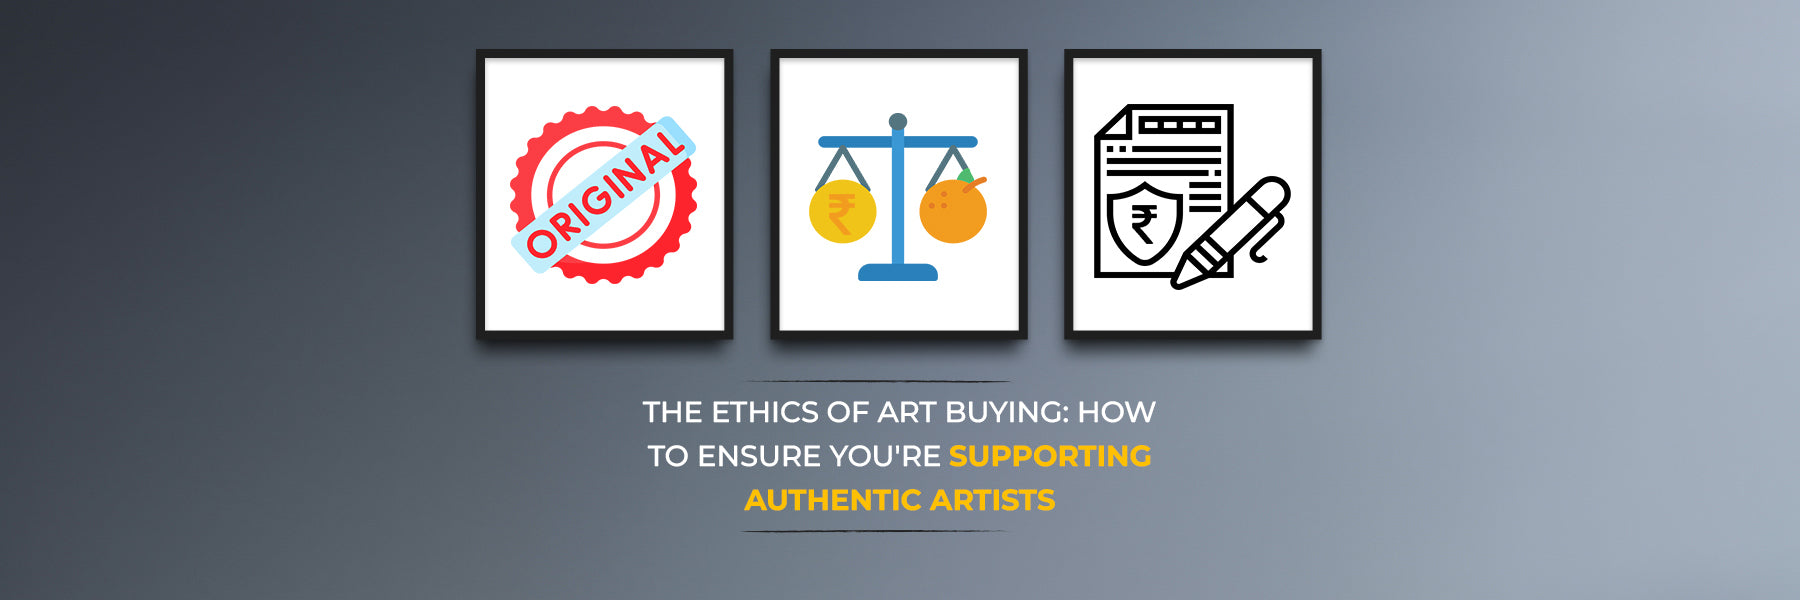 The Ethics of Art Buying: How to Ensure You're Supporting Authentic Artists